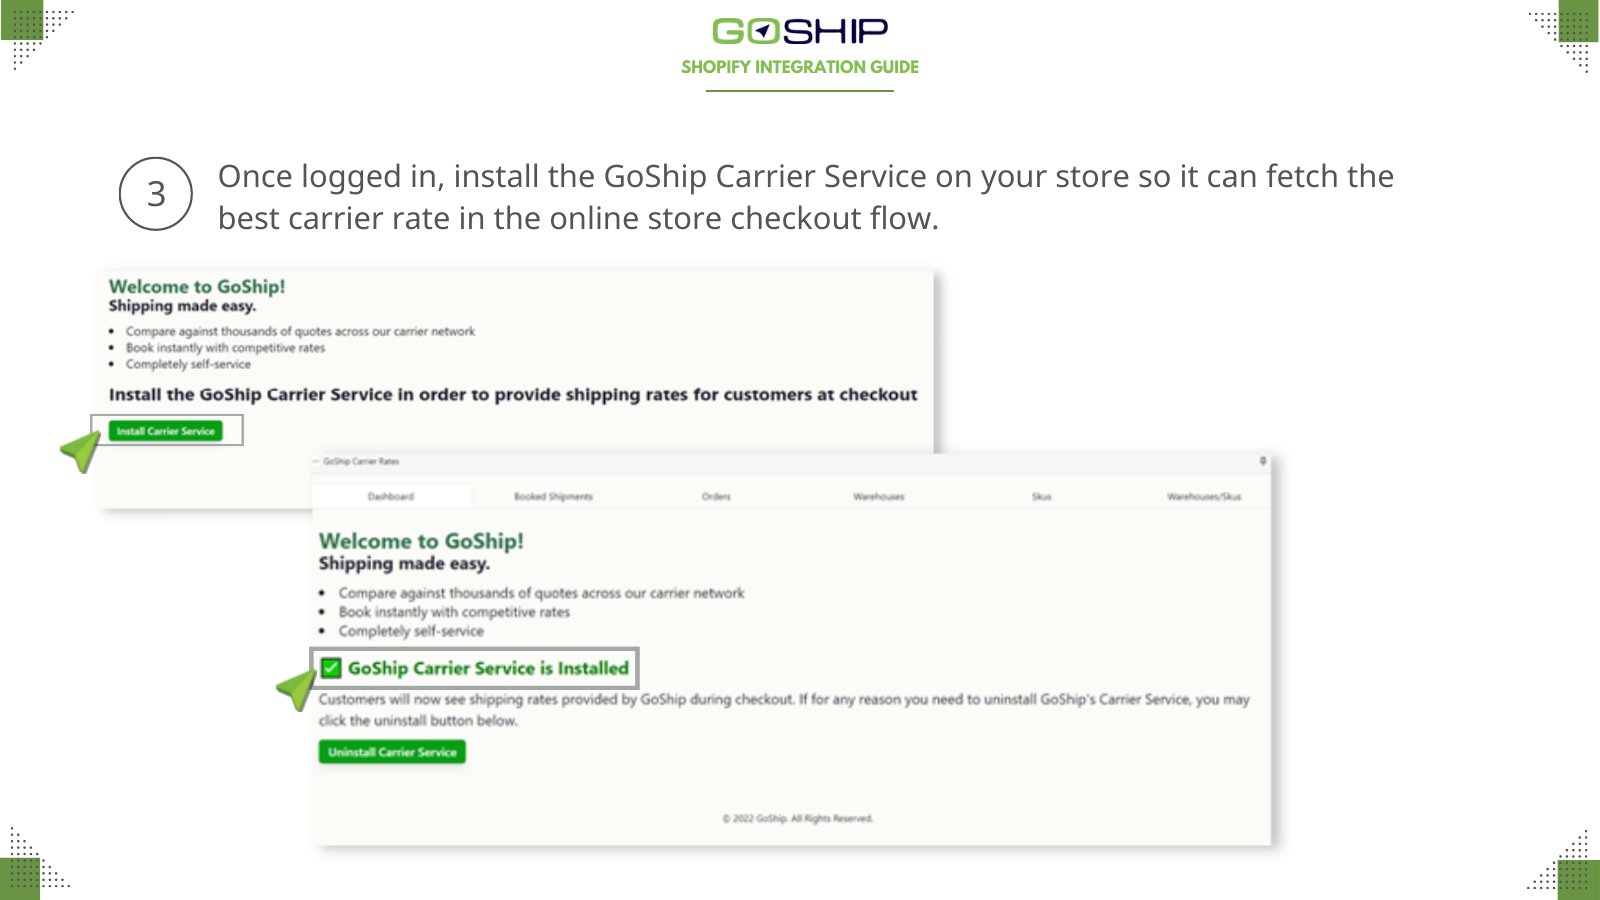 Install carrier service to register carrier